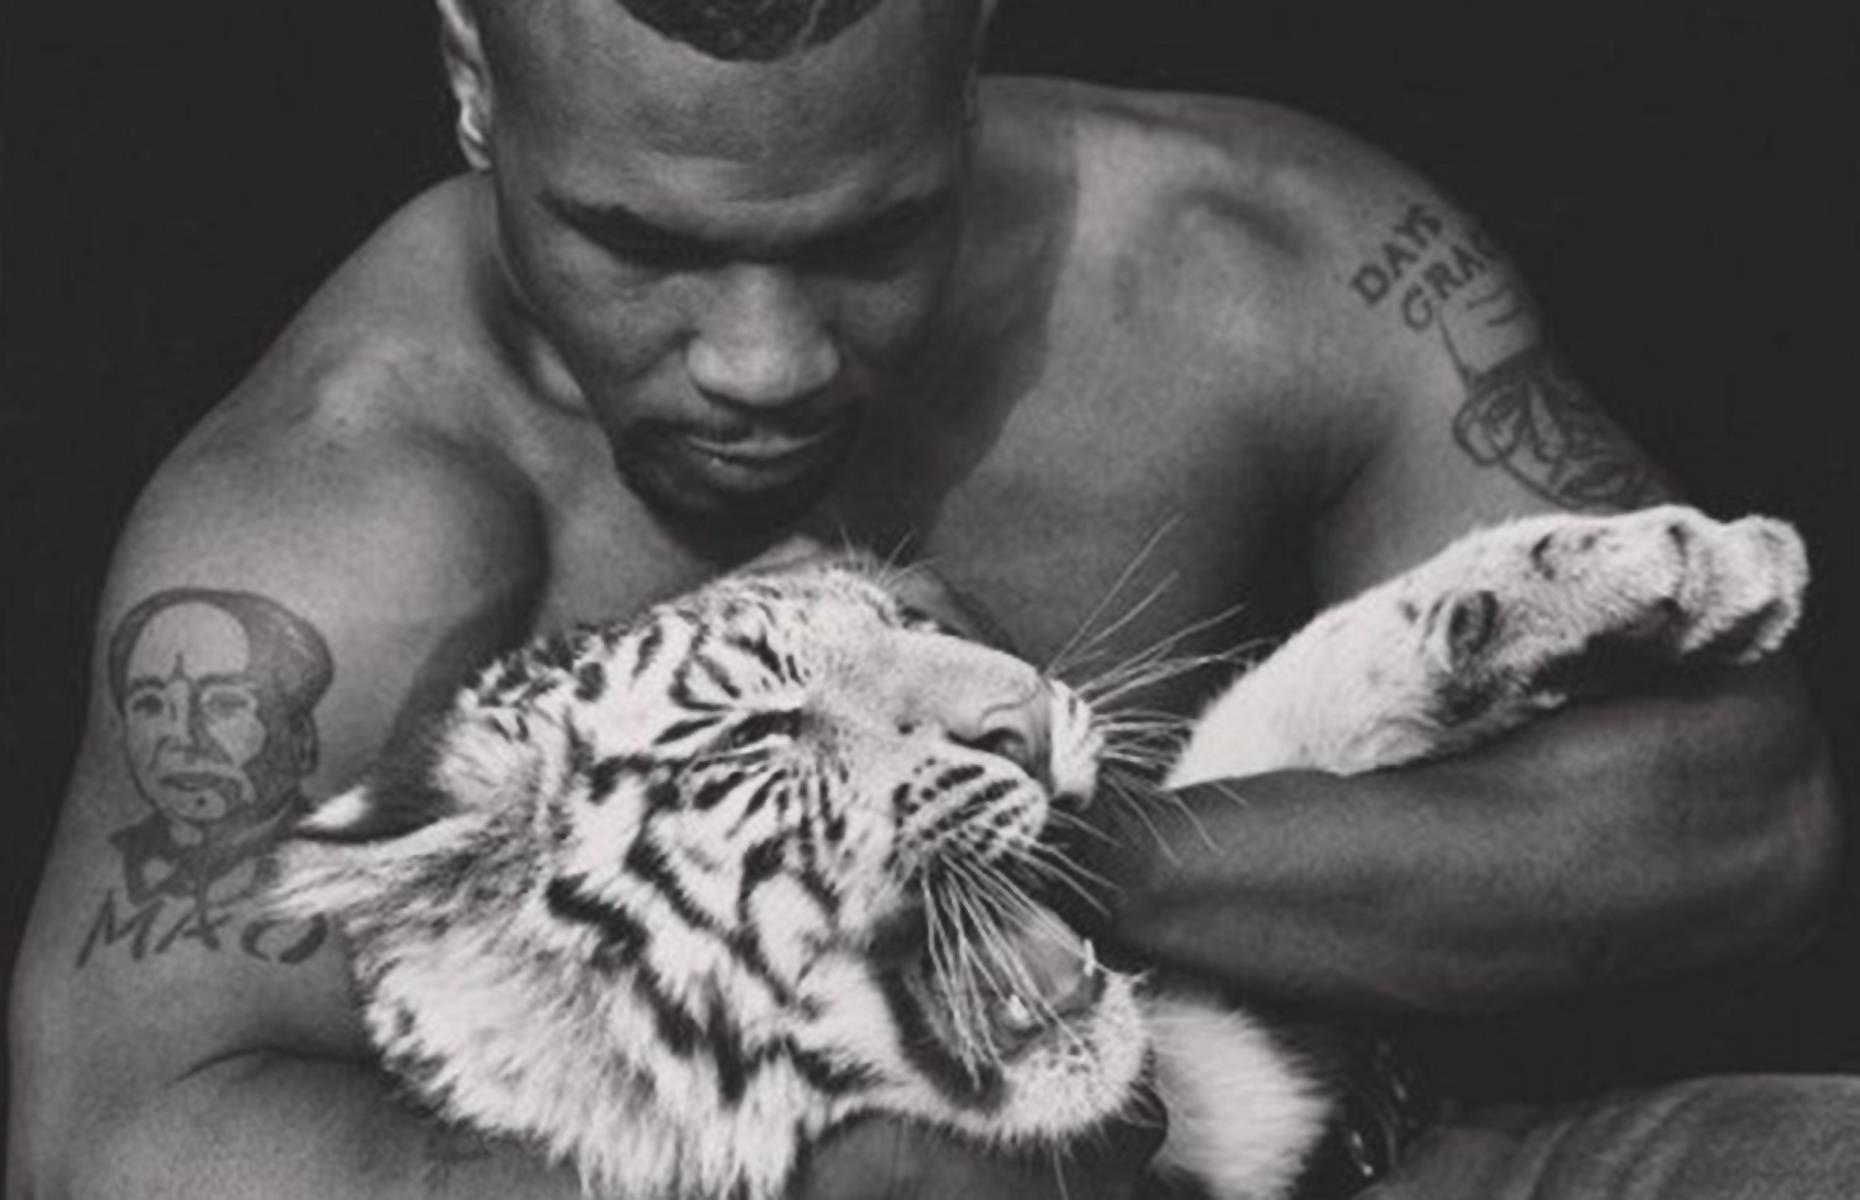 Mike Tyson’s Bengal tigers, $70,000 (£44k) each